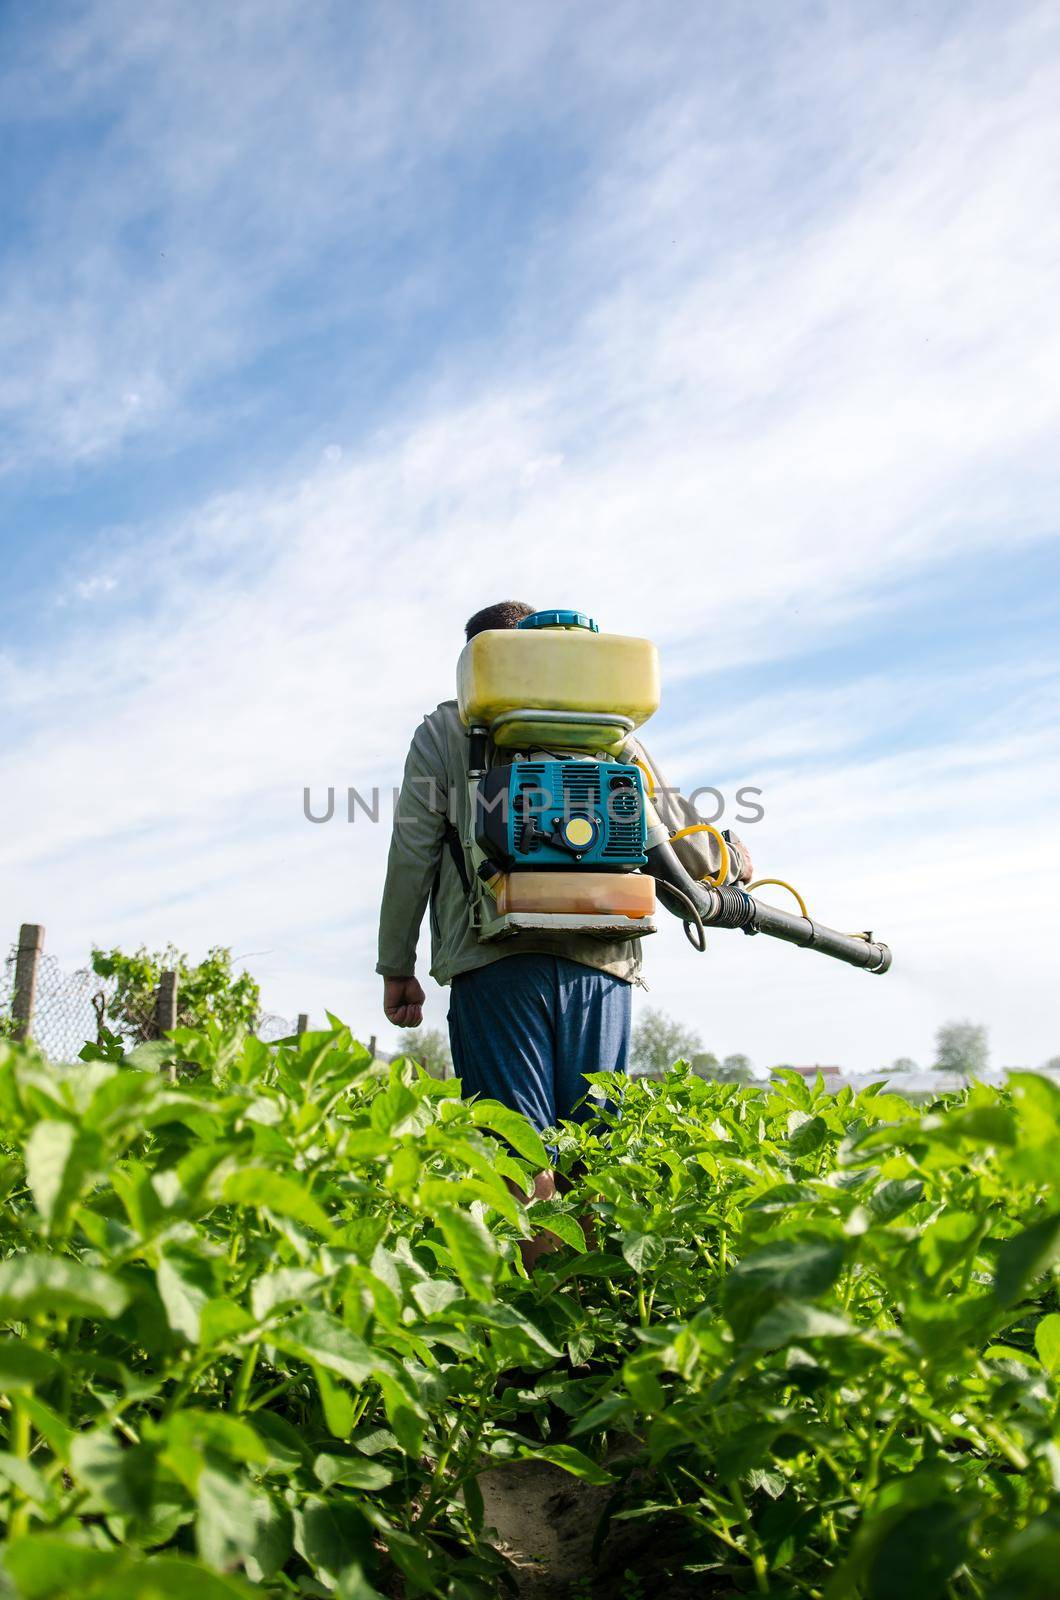 Farmer with a mist sprayer walks through farm field. Protection of cultivated plants from insects and fungal infections. Use of chemicals for crop protection in agriculture. Farming growing vegetables